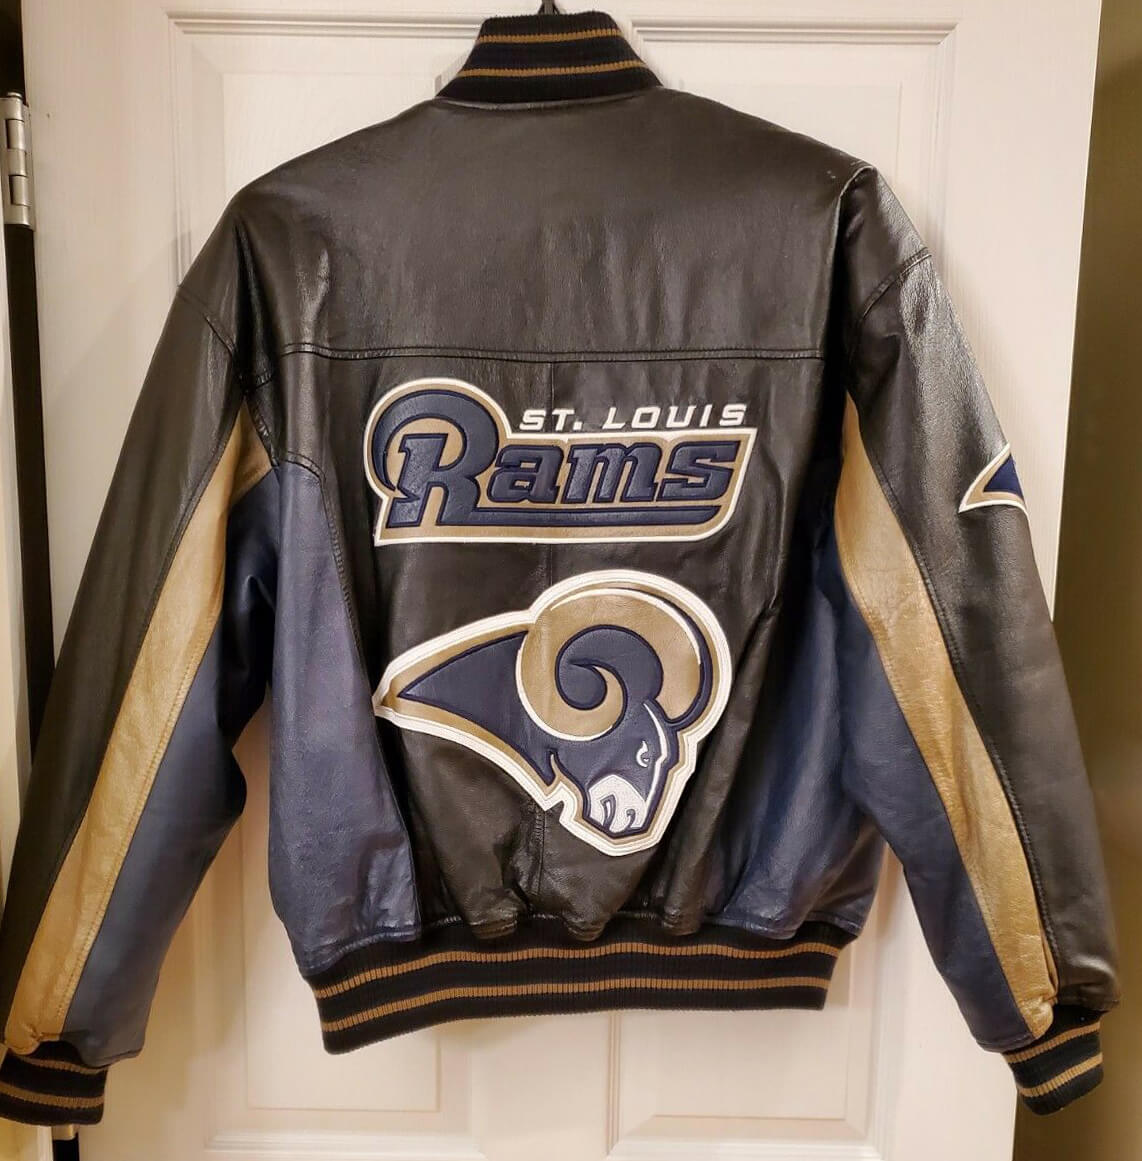 St. Louis Rams Leather jacket in excellent condition: size 2X